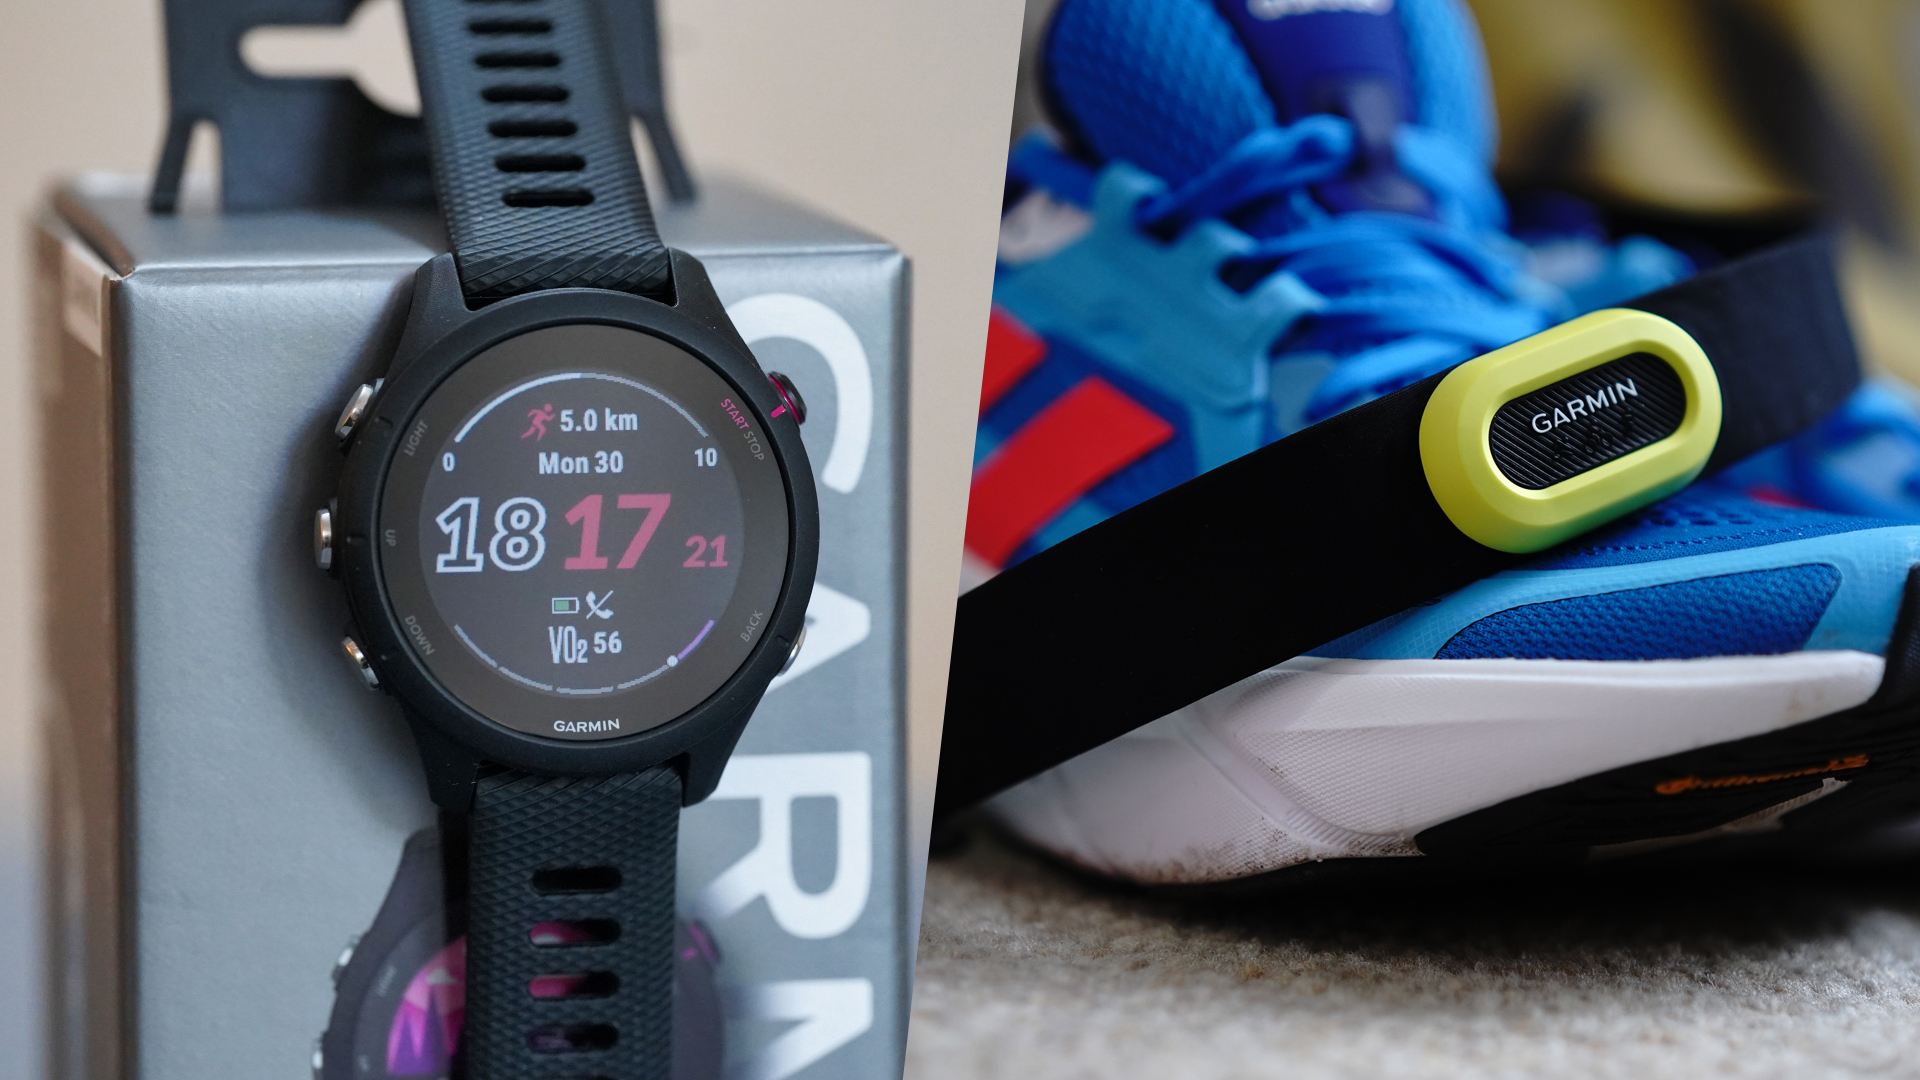 Garmin HRM Pro vs Pro Plus - What's the difference?